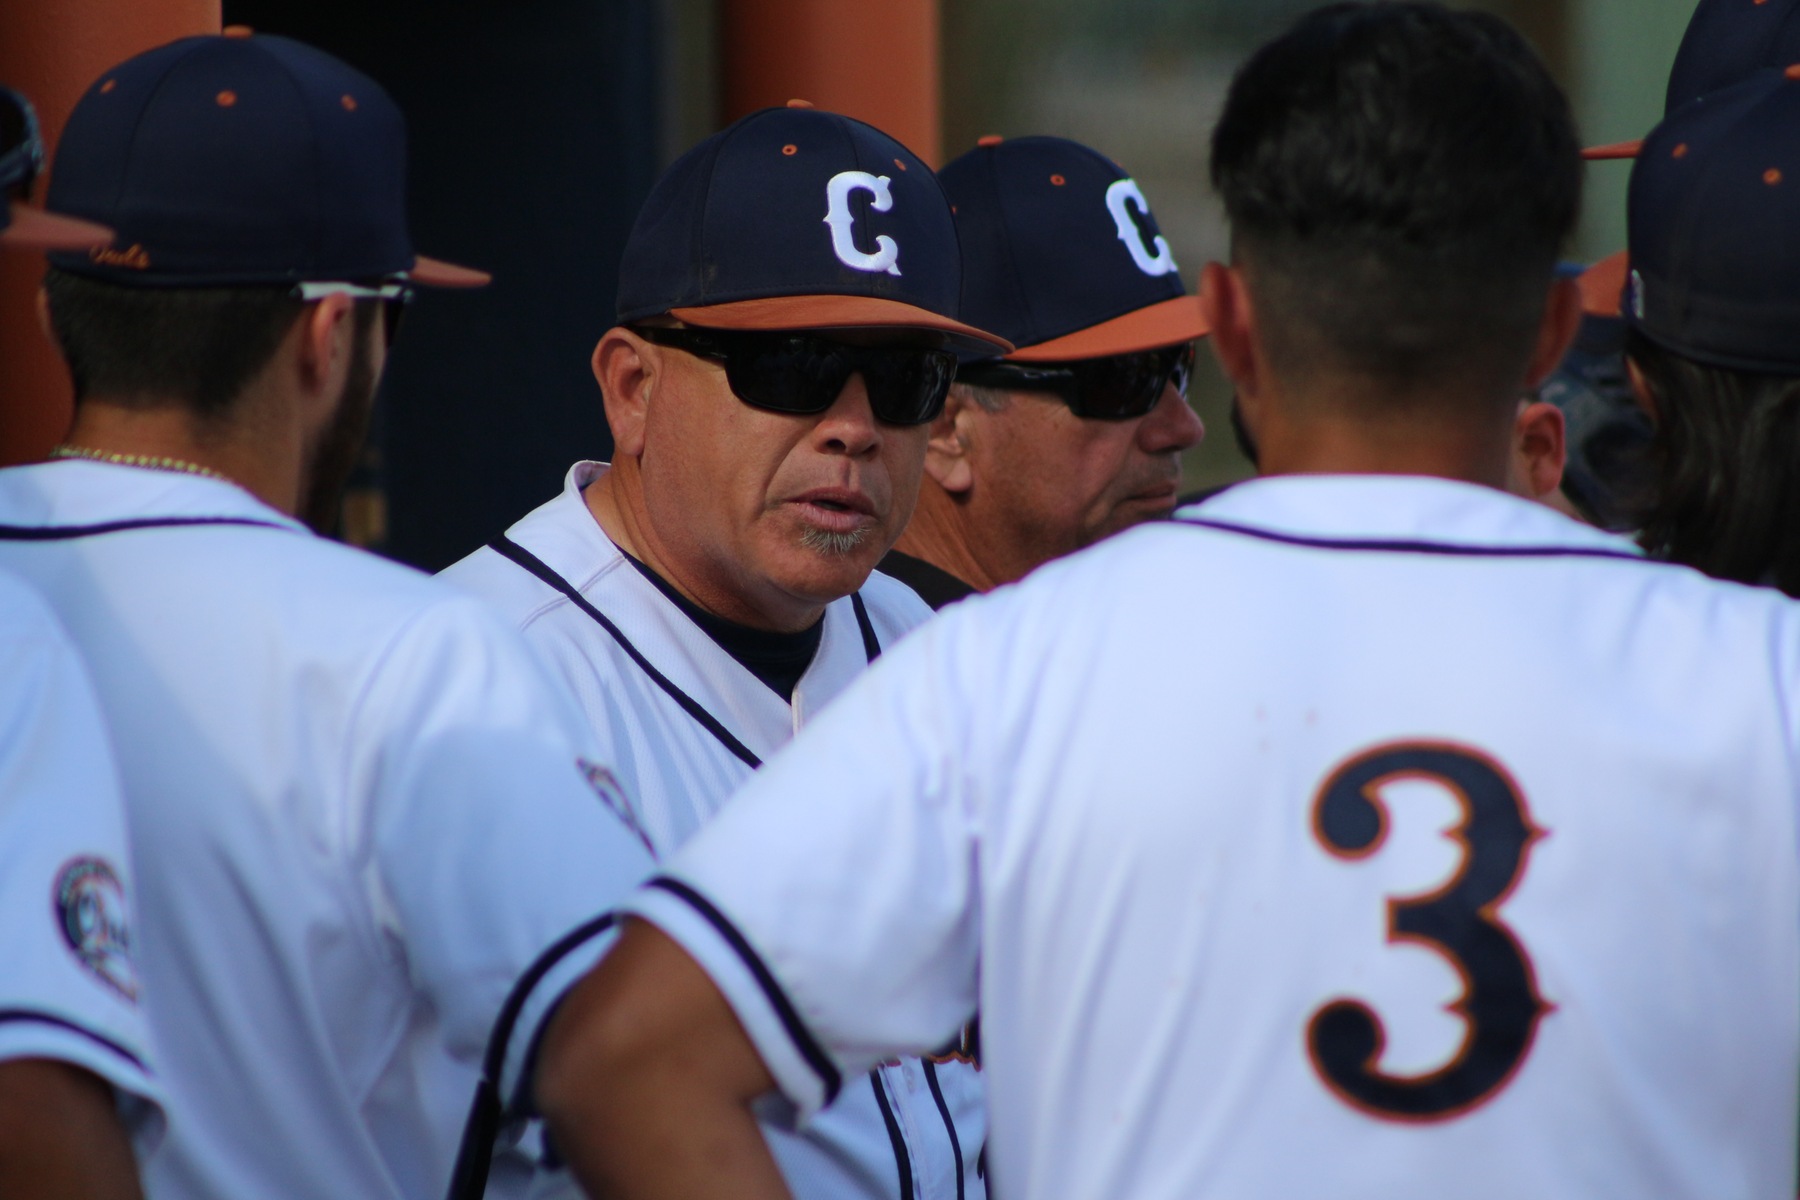 Head Coach Steve Gomez motivating his guys in the dugout.